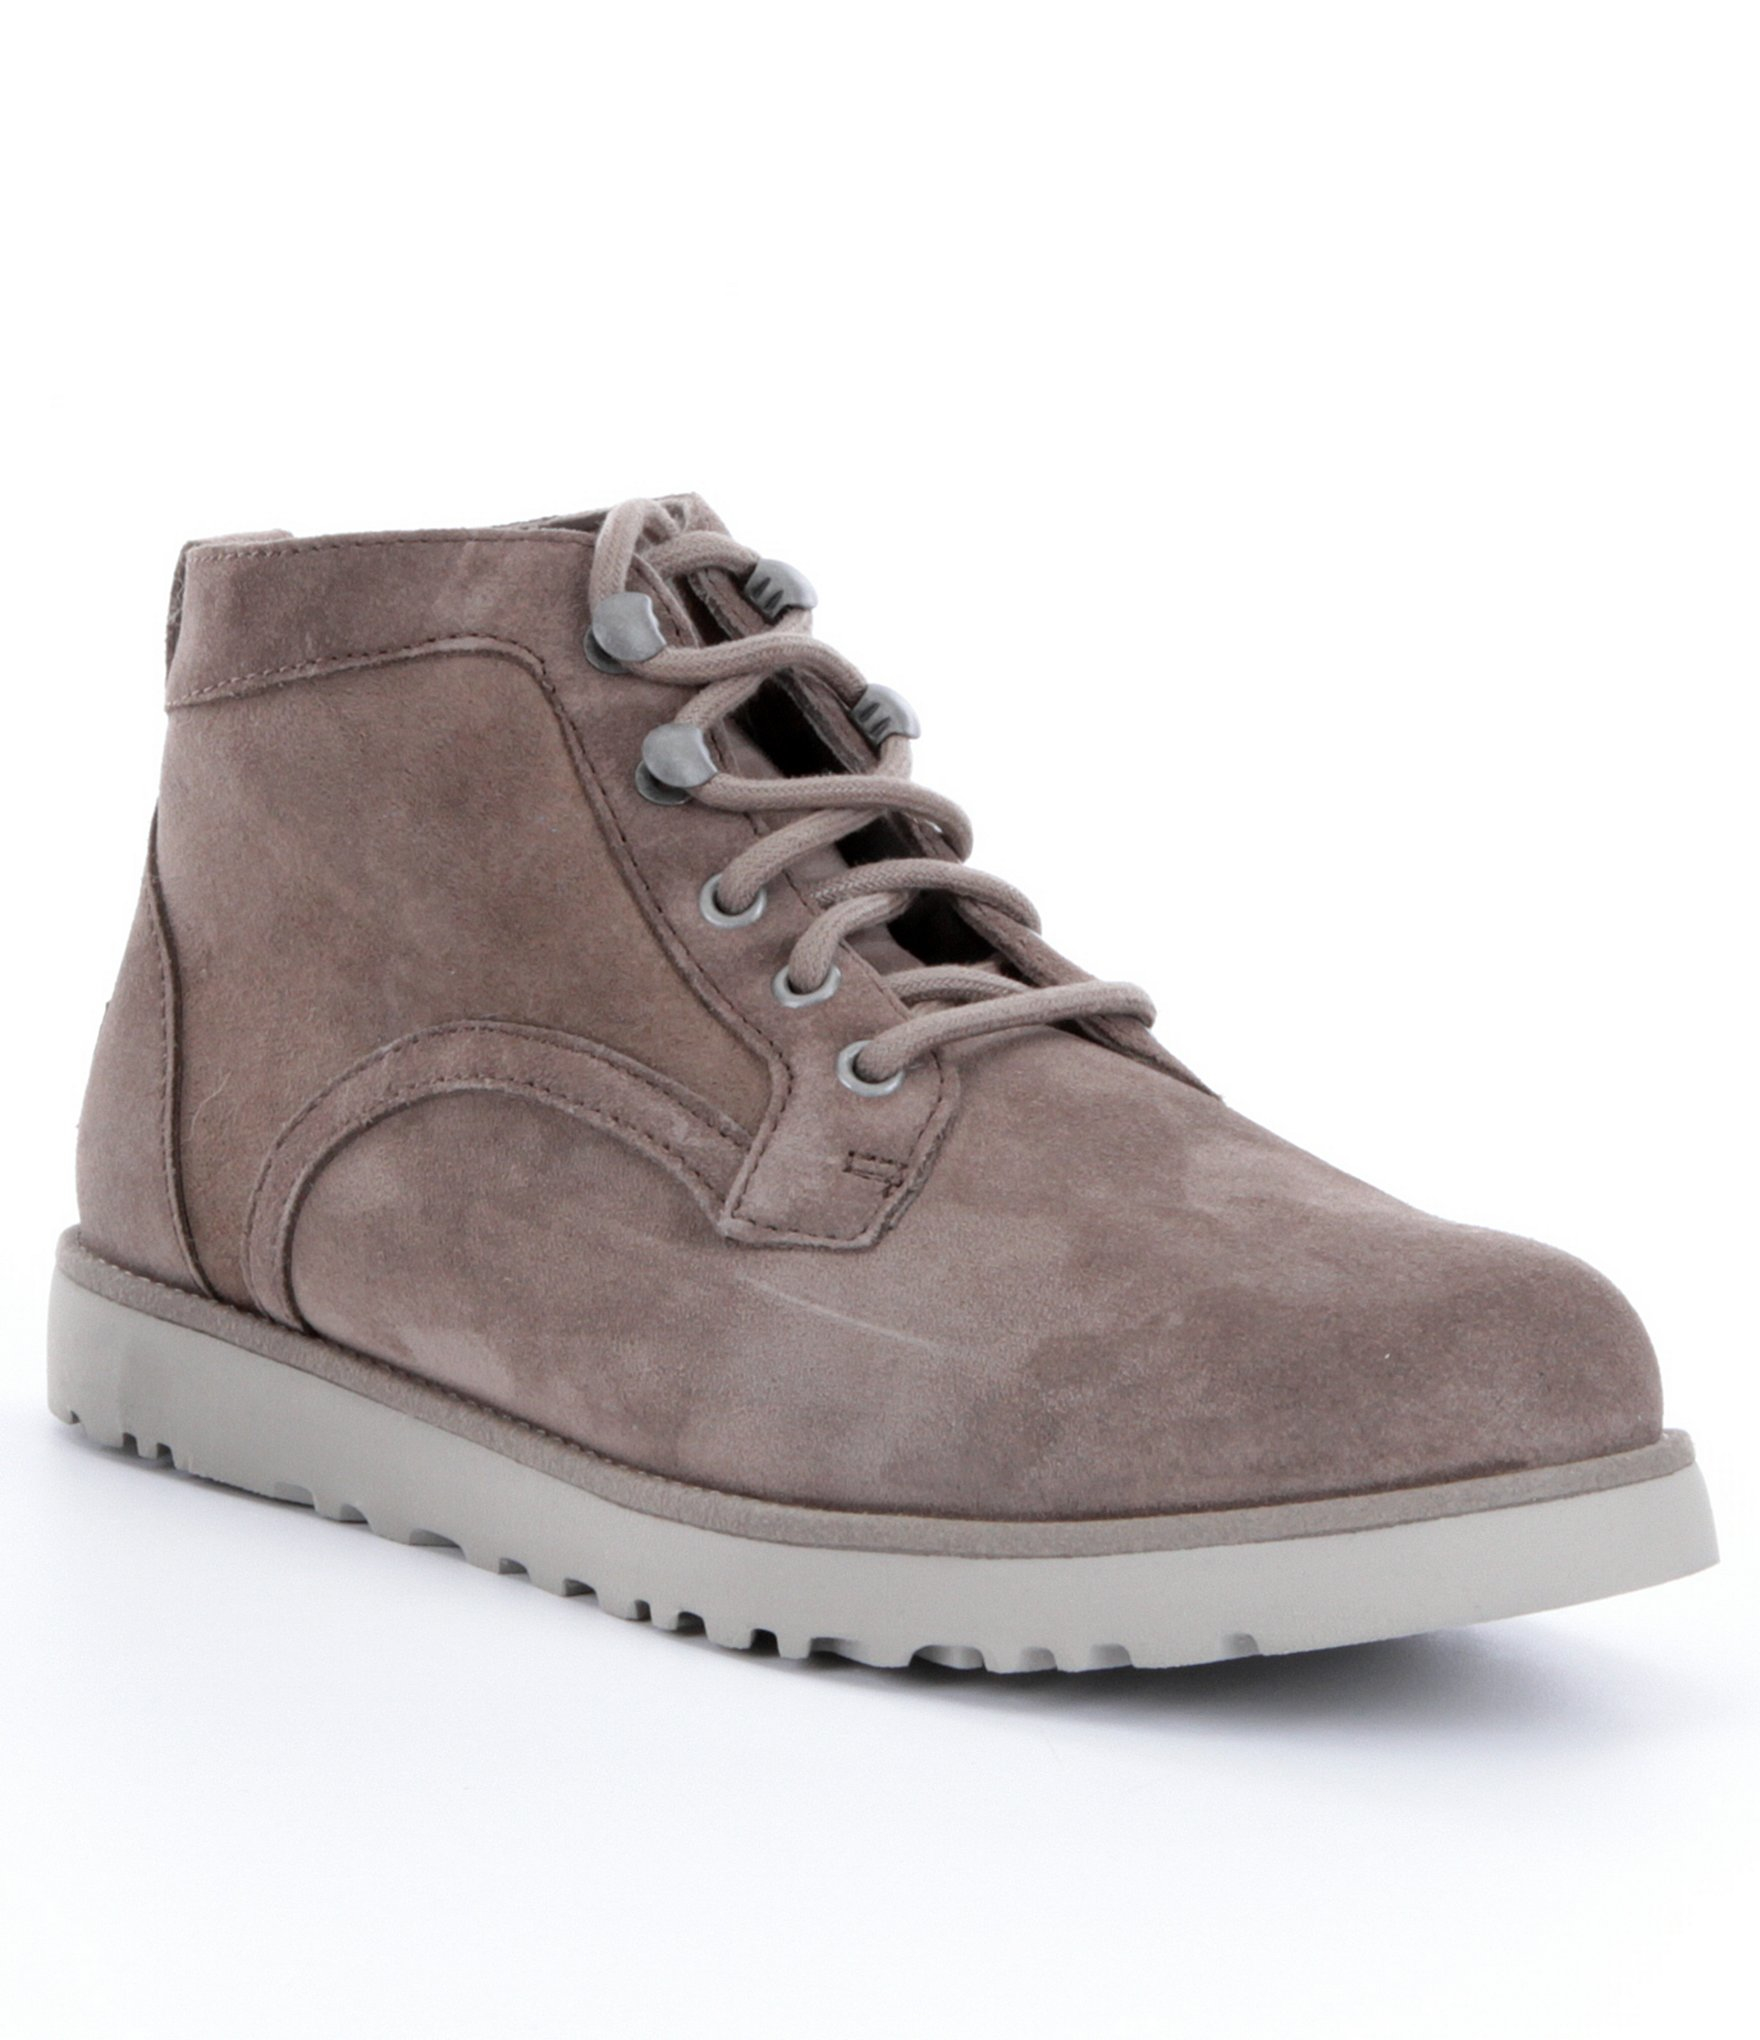 UGG ® Bethany Classic Slim Chukka Boots in Brown for Men - Lyst